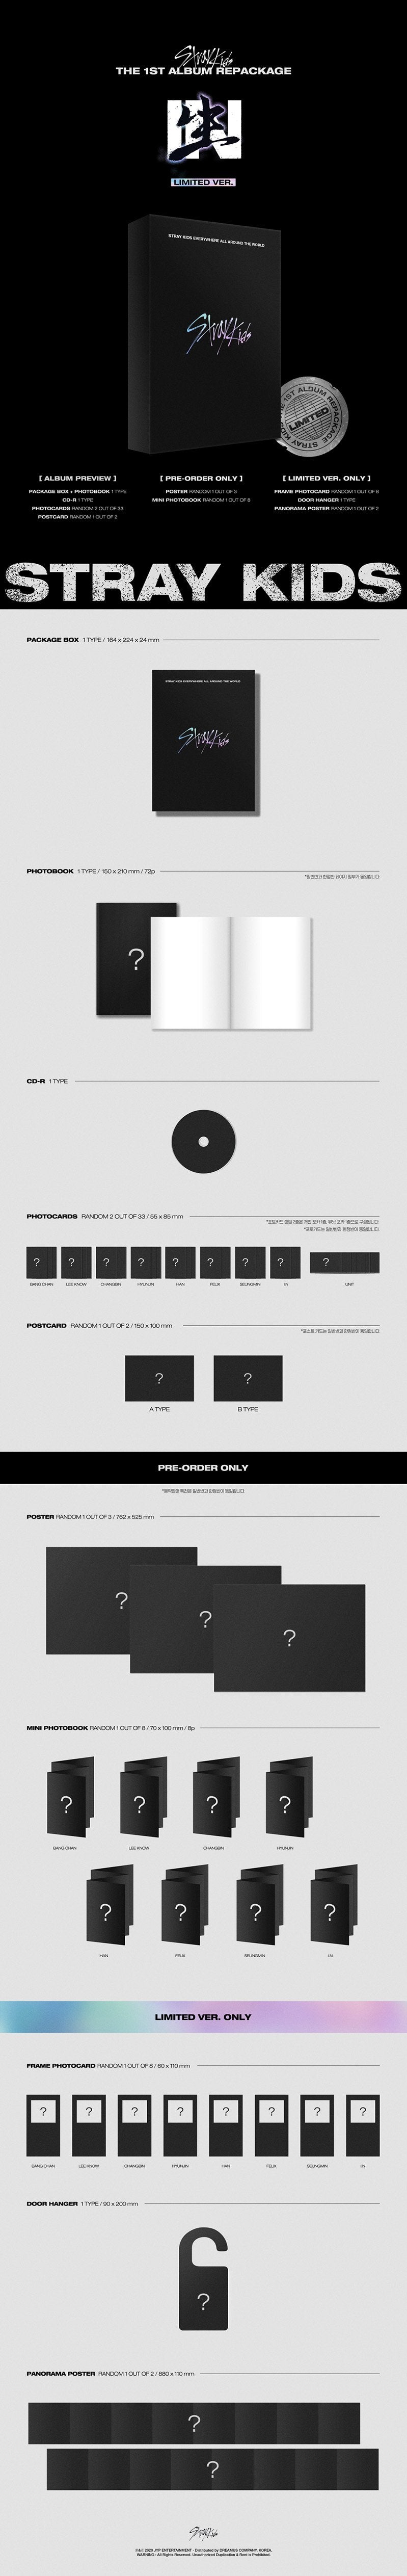 Stray Kids Repackage Album Vol1 IN IN LIFE Limited Edition VKPOP